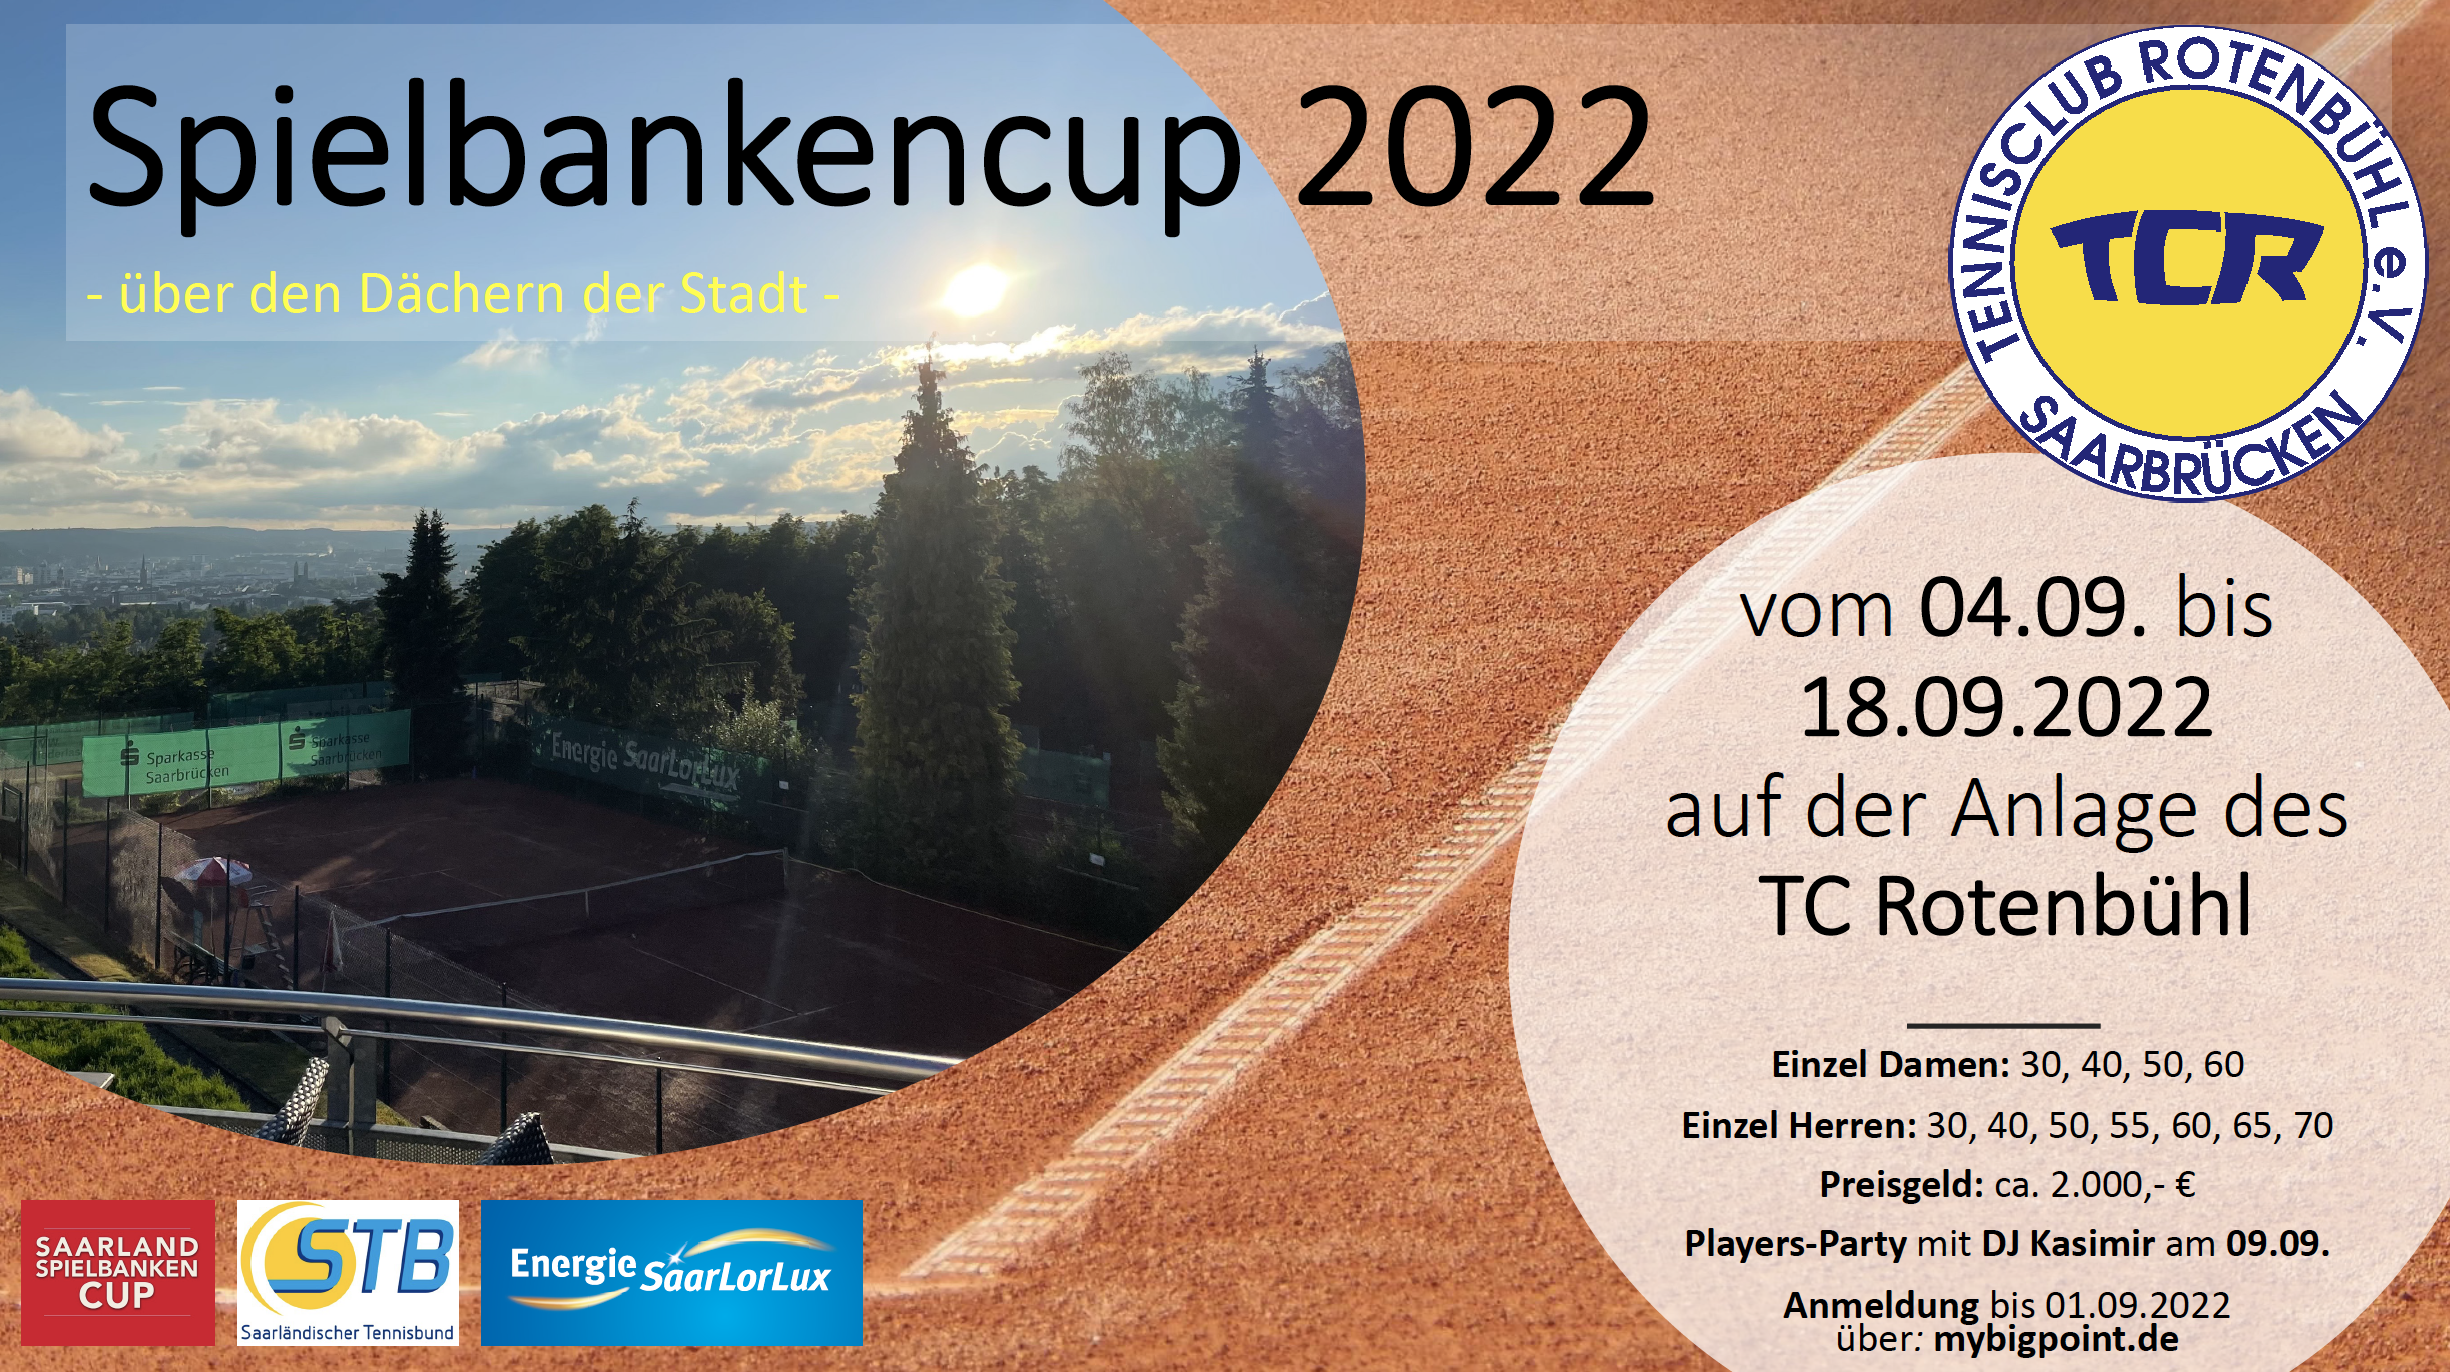 You are currently viewing Spielbankencup 2022 in unserem Club